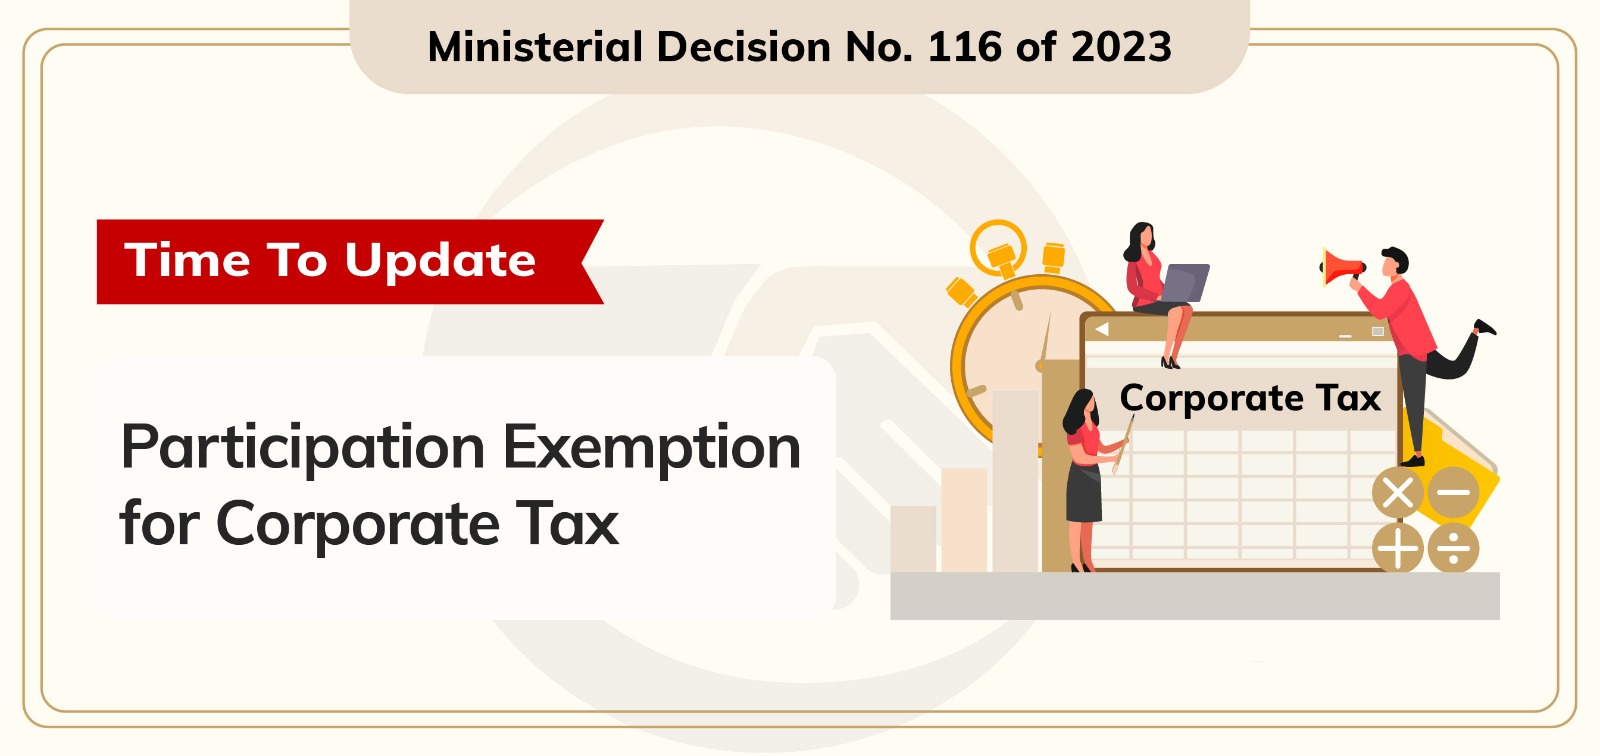 Participation Exemption for Corporate Tax